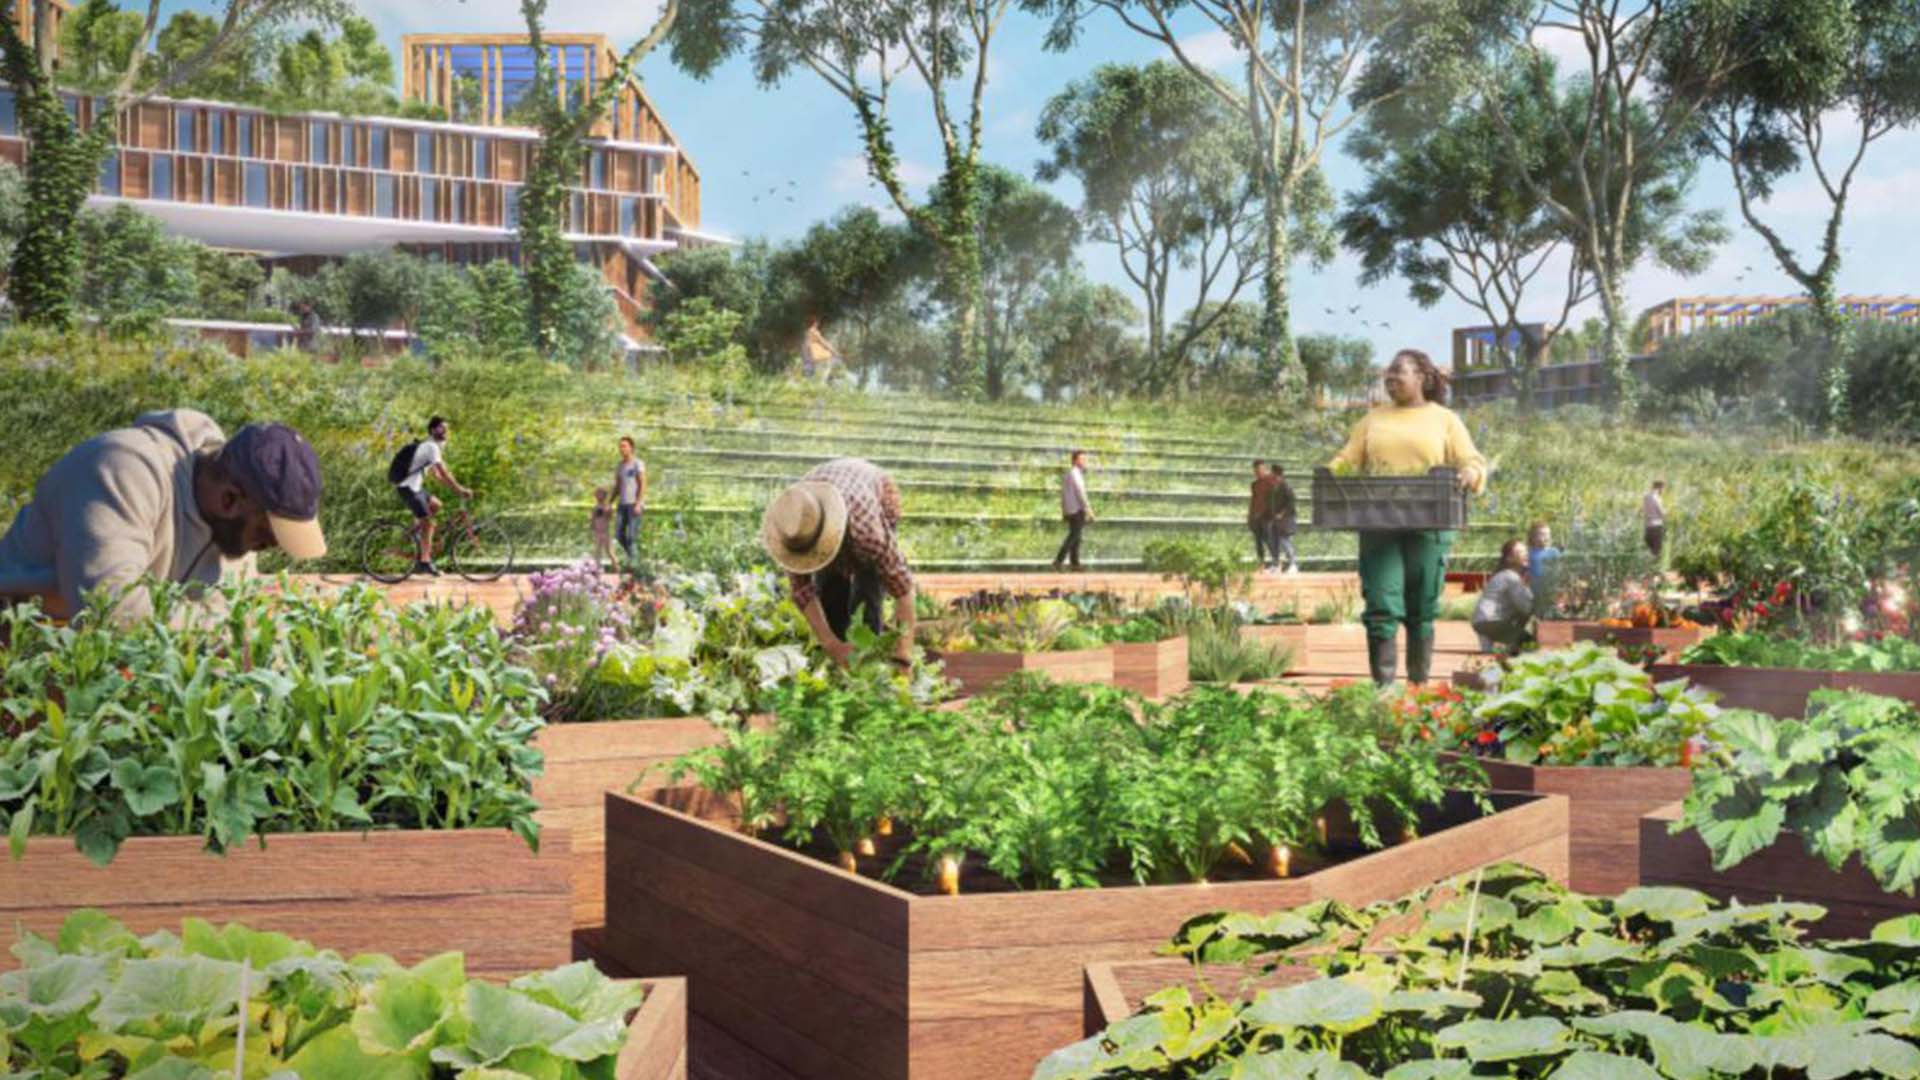 Artist rendering of THE PARKS' urban farming with residents farming